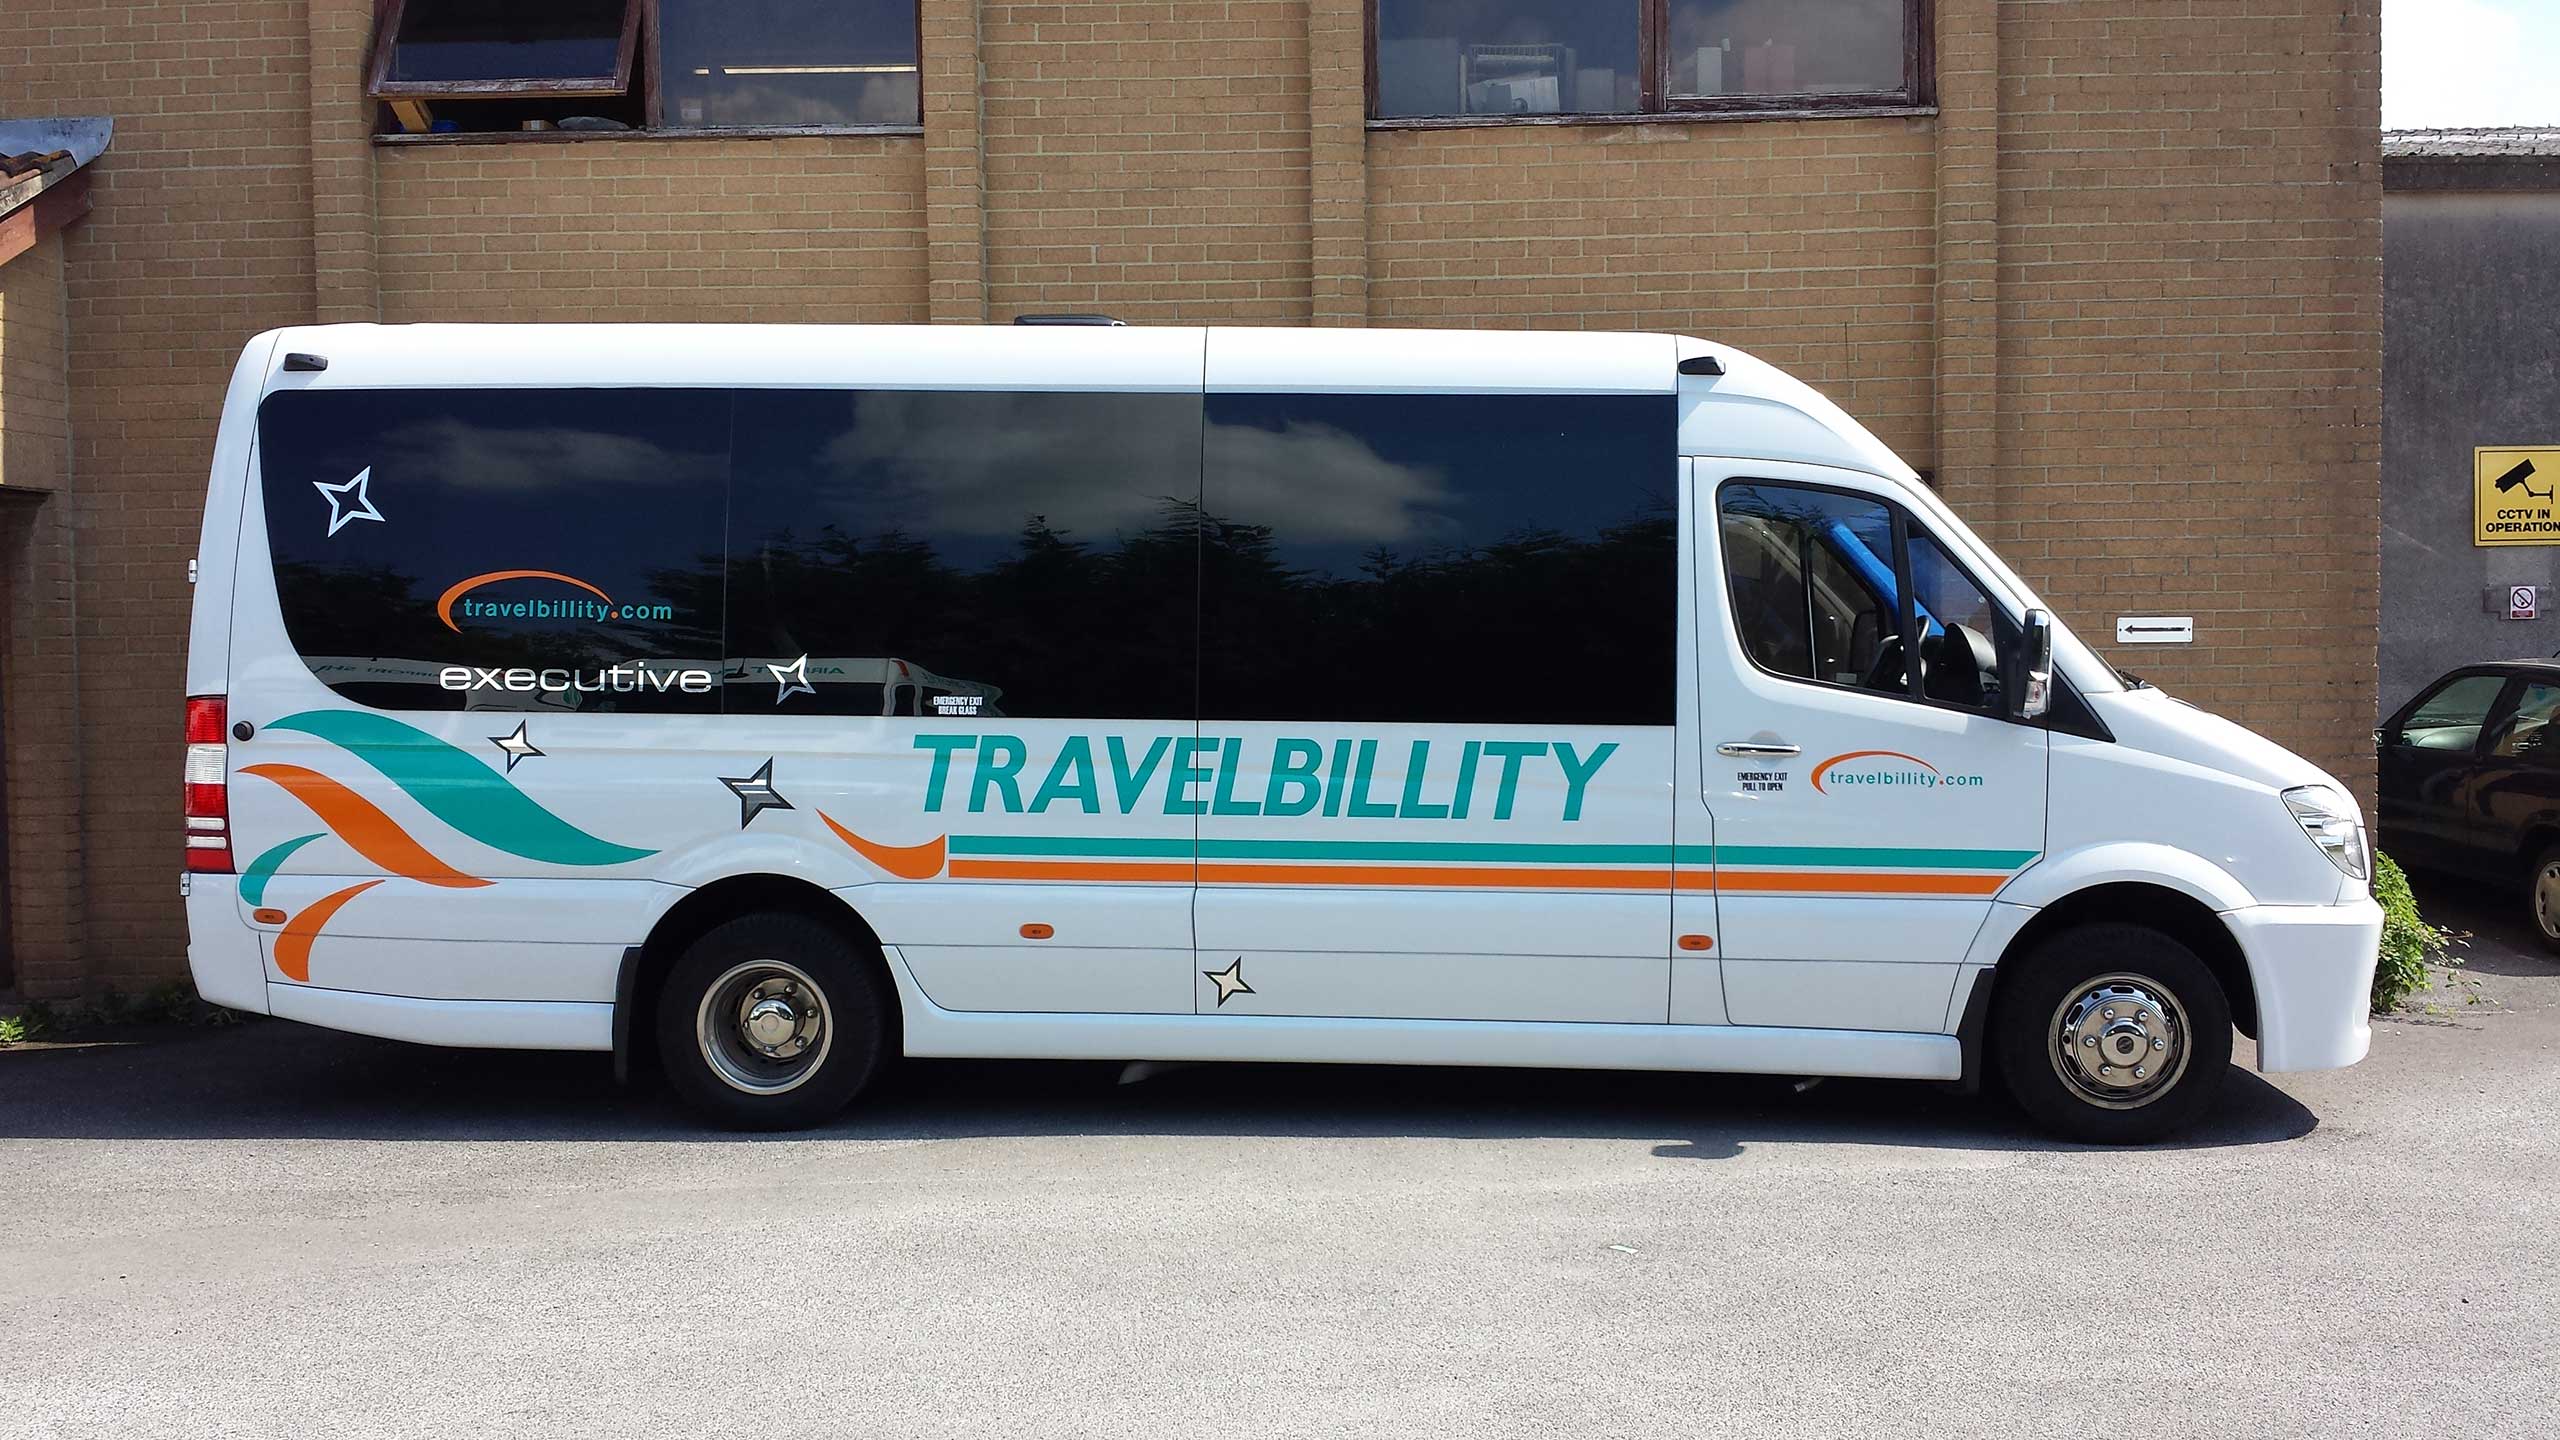 Executive Minibus with 'travelbillity' on the side